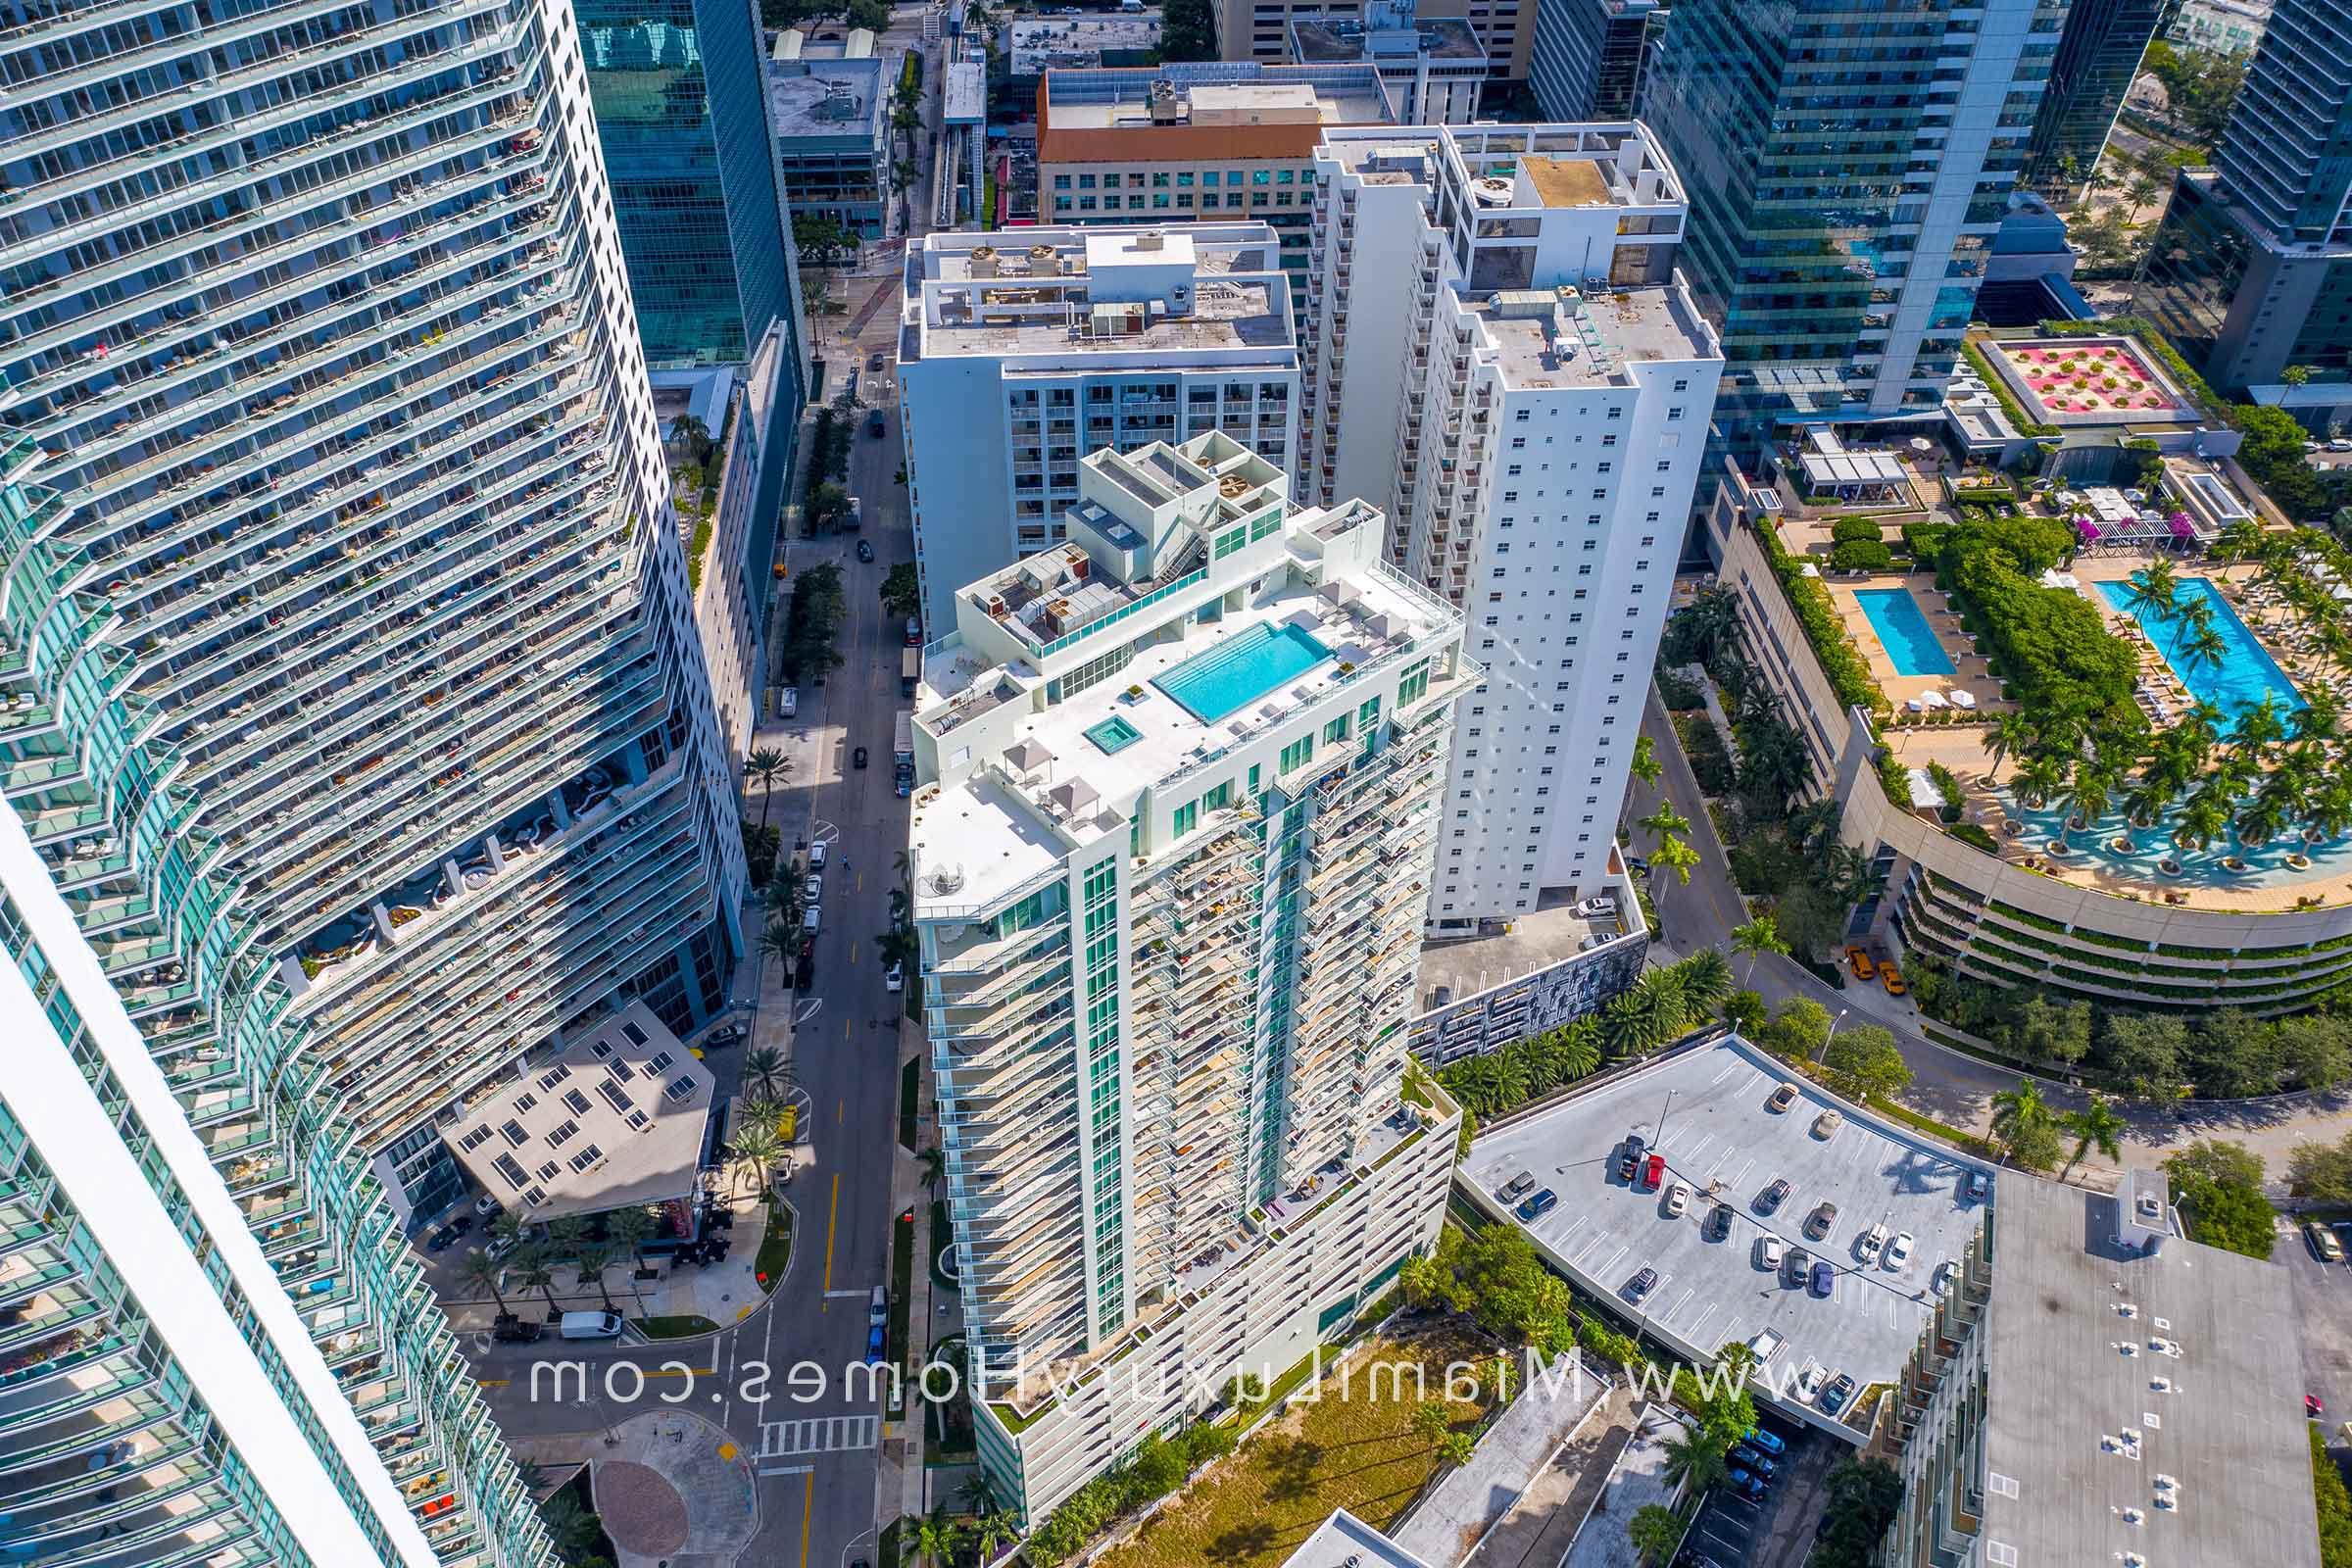 Aerial View of Emerald at Brickell